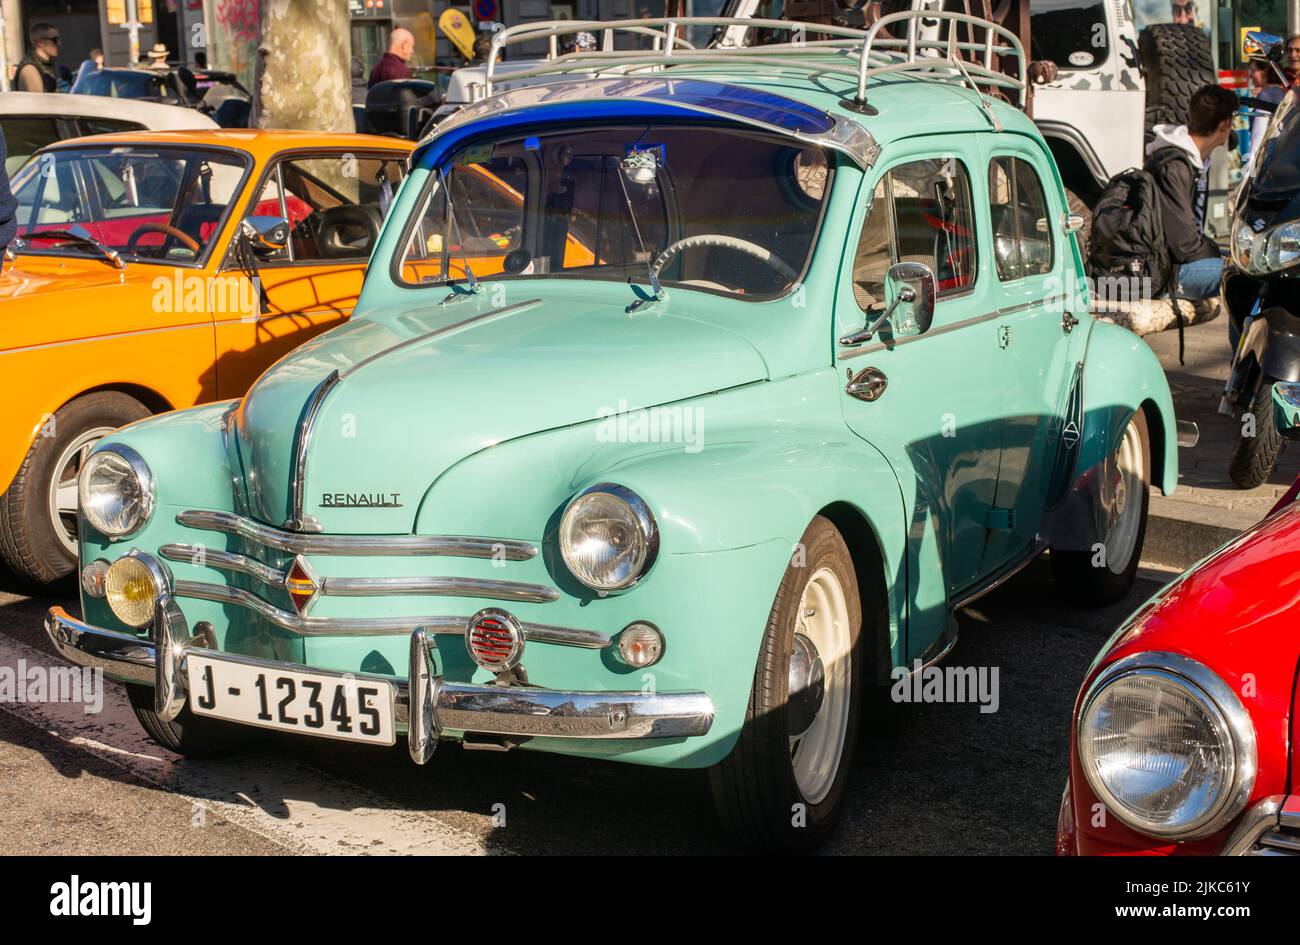 Renault 4cv classic on Exhibition of classic cars on Paseo de Gracia in Barcelona city Stock Photo